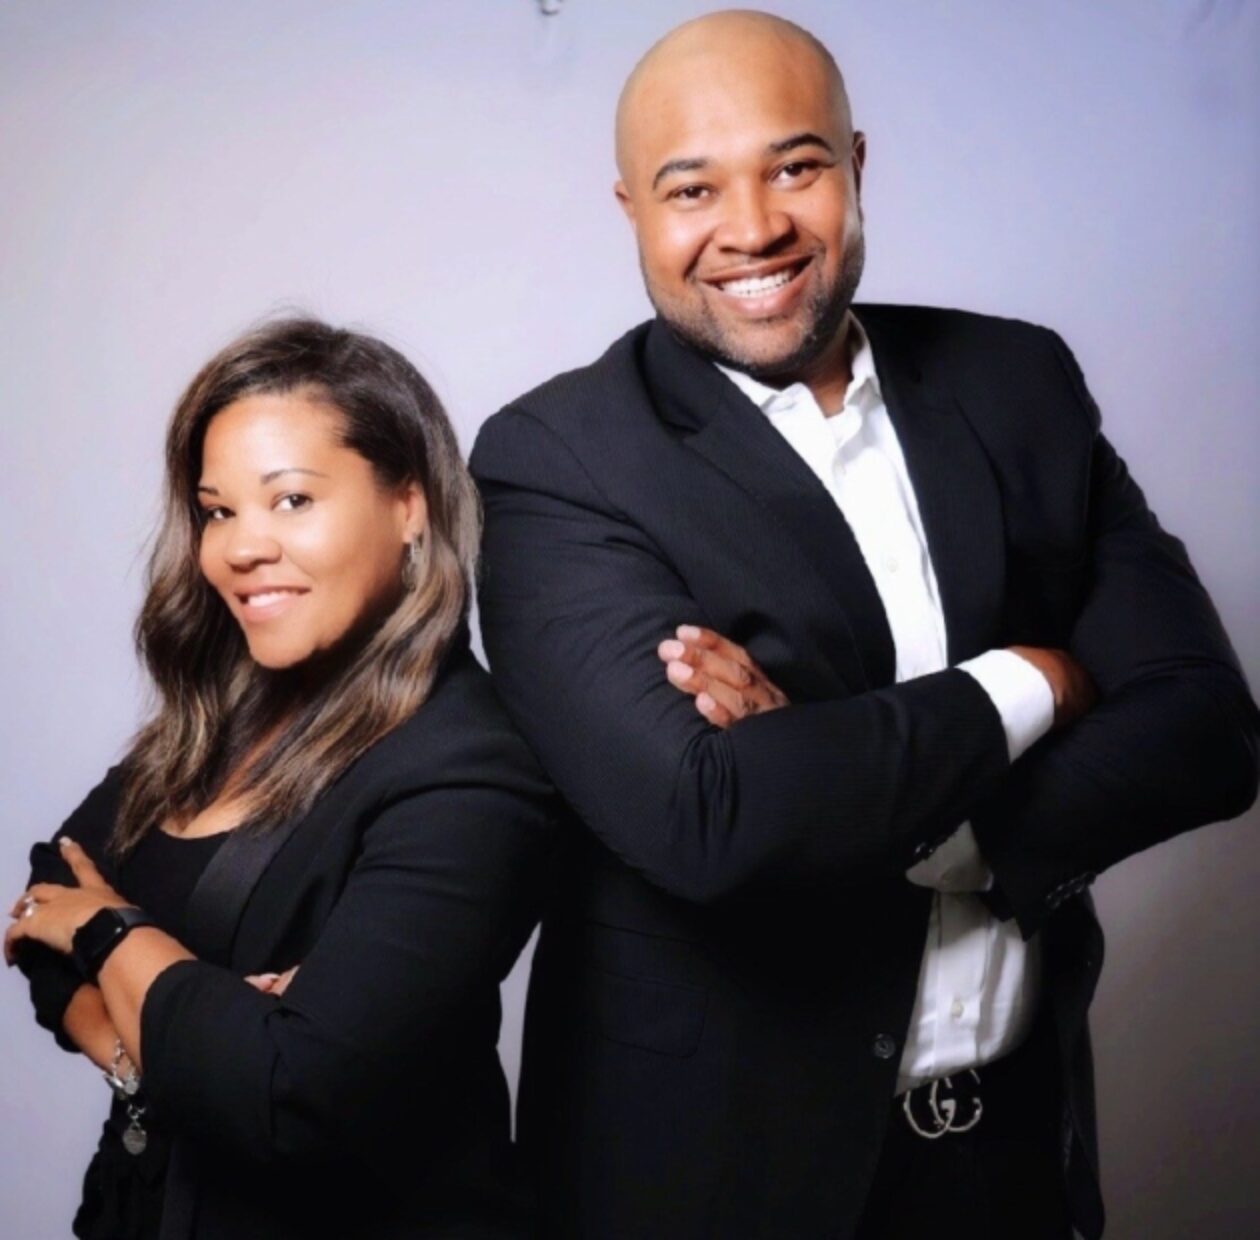 Success and Impact: 5 questions with Jeff and Eboné Granger 1